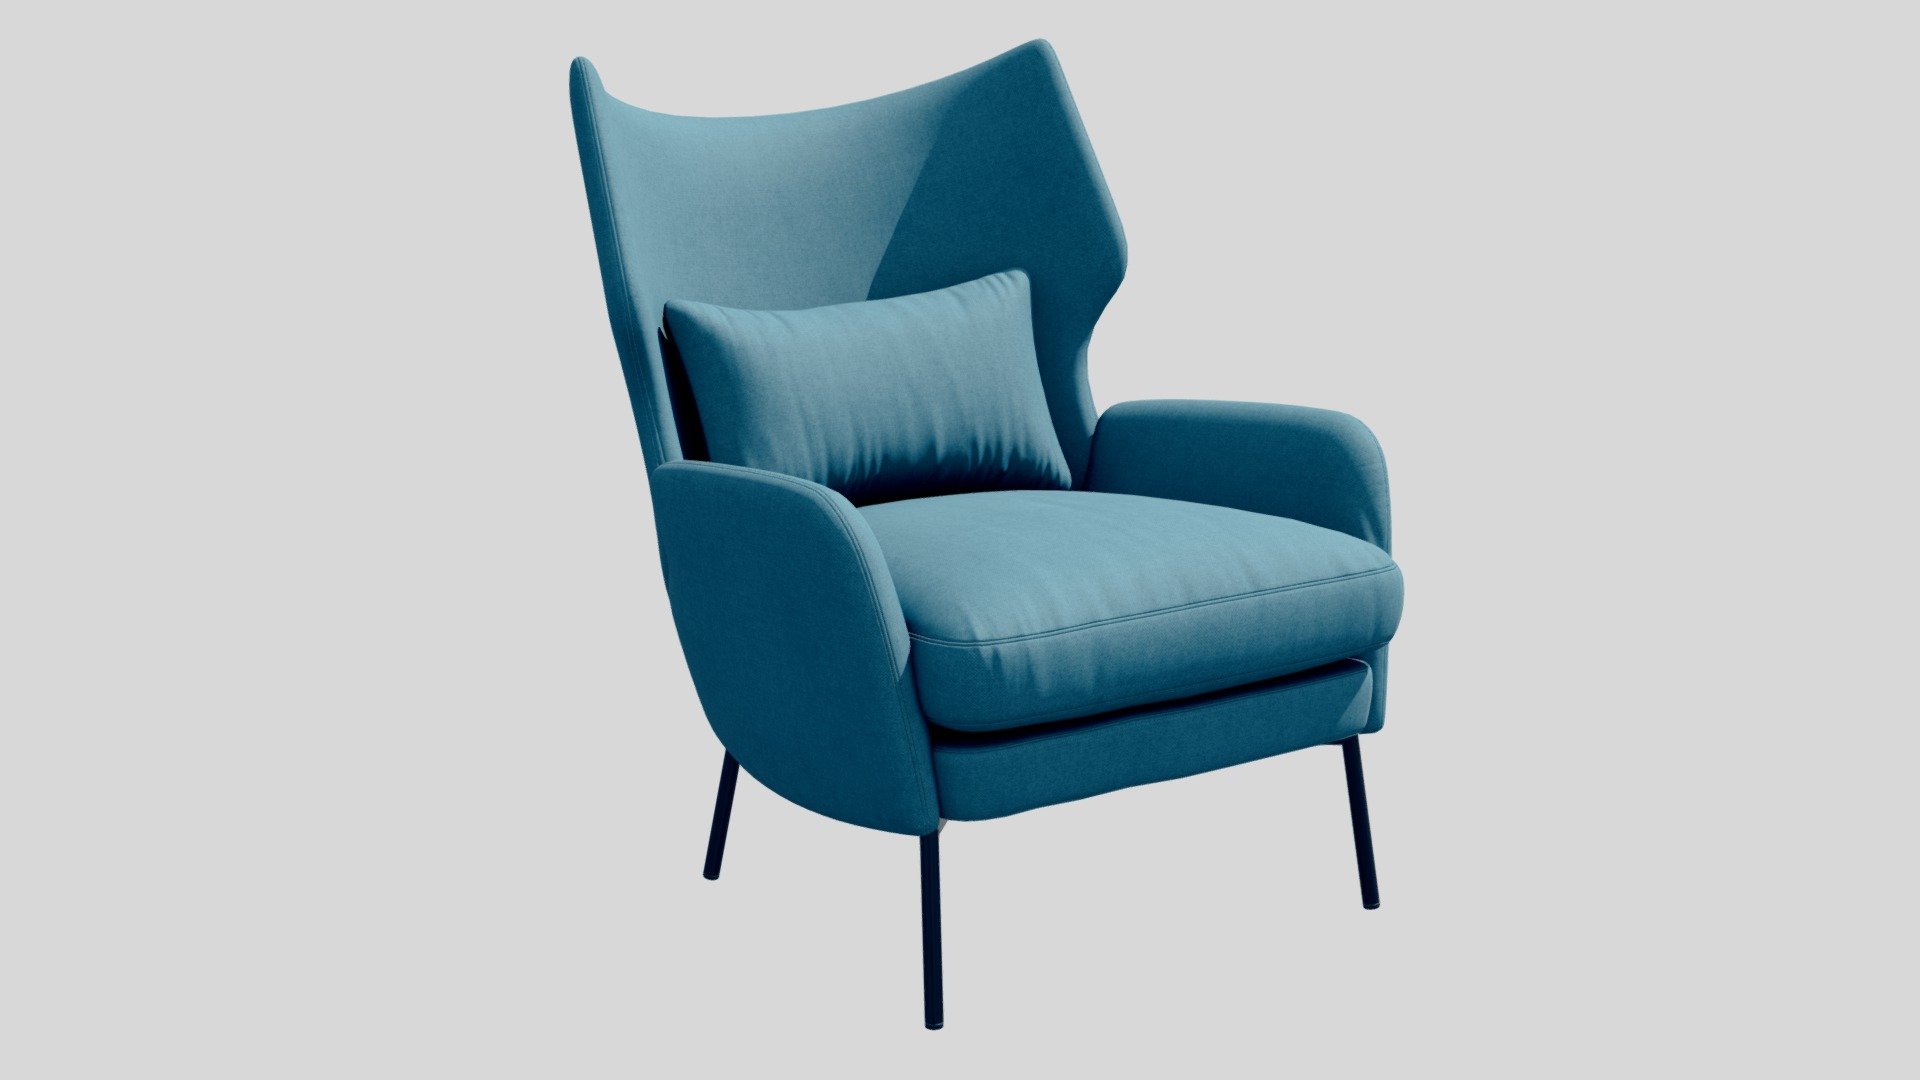 High-quality 3d model of a Crete and Barrel Alex Navy Blue, Gray, and Bordeaux Velvet Accent Chair.

12804 polygons
13447 vertices - Crate&Barrel Alex Armchair - Buy Royalty Free 3D model by 3detto 3d model